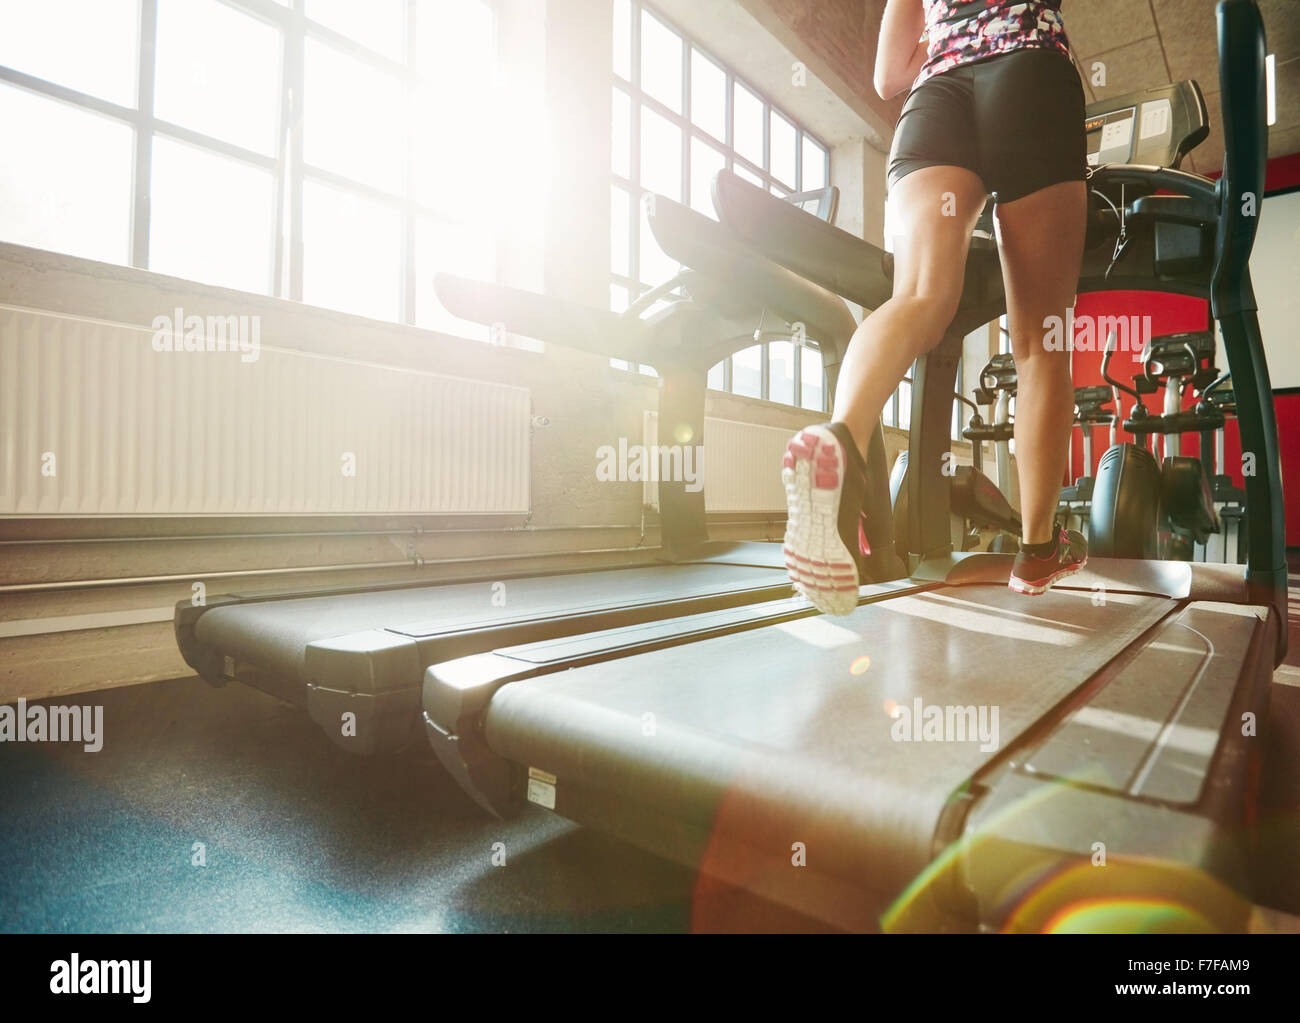 Rear view of woman in action running on treadmill. Focus on woman legs exercising on treadmill at the gym. Stock Photo